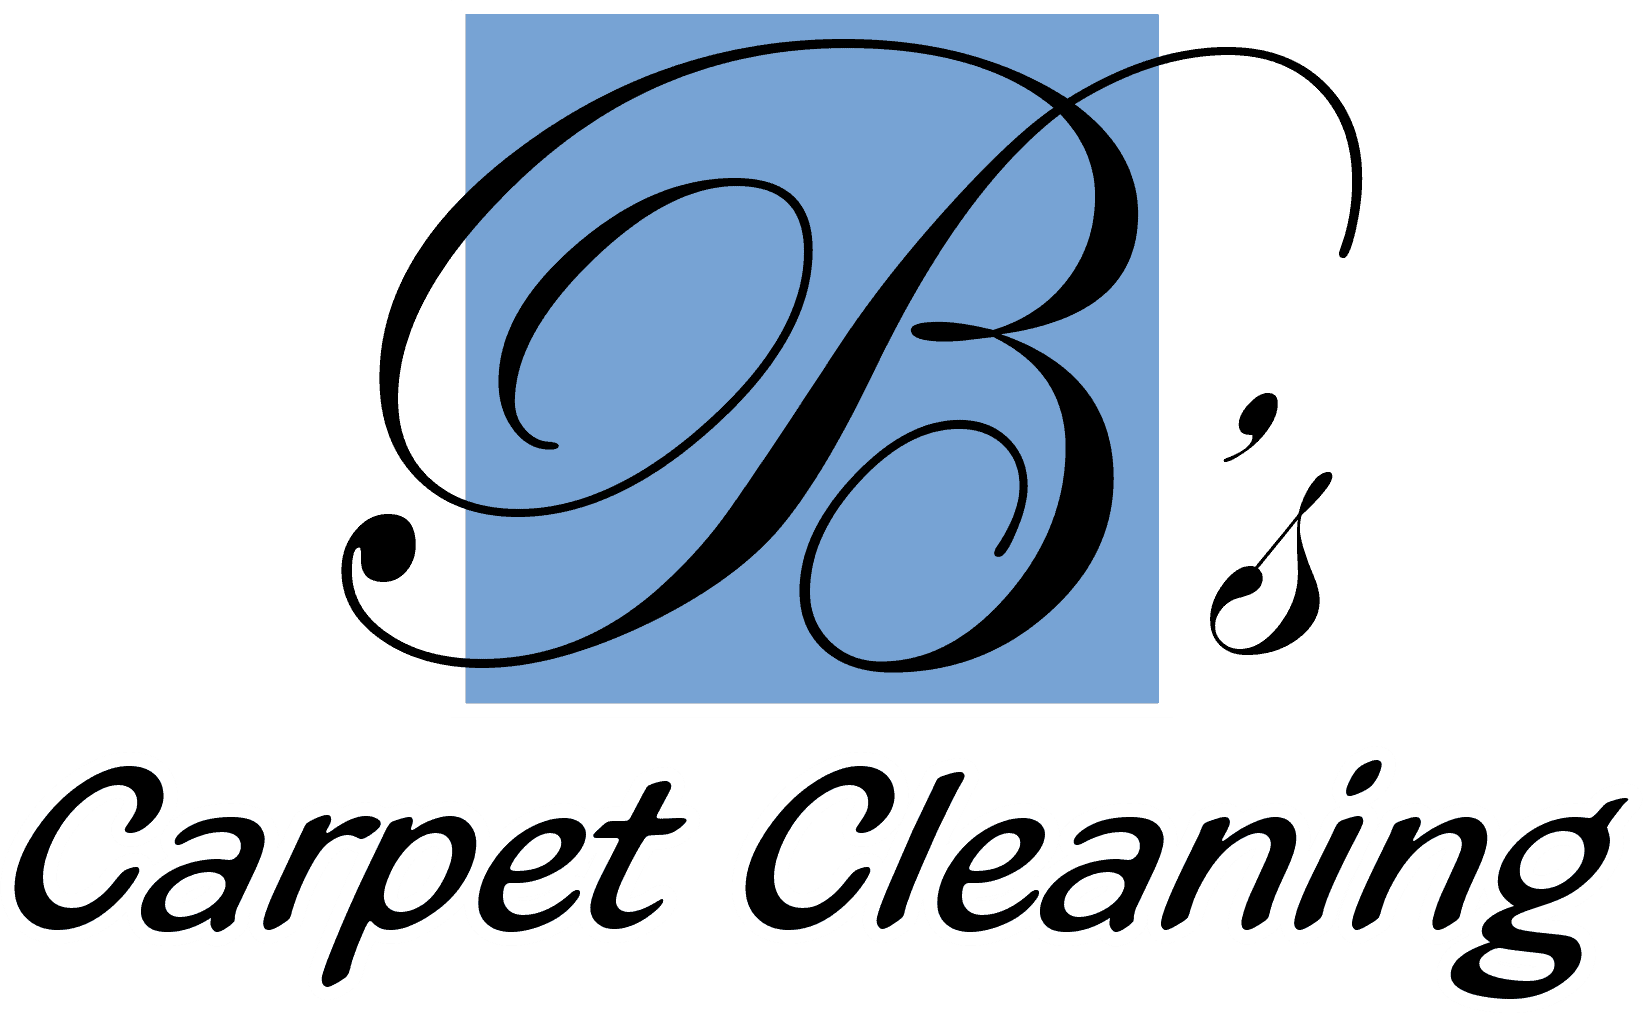 st-george-carpet-cleaning-service-b-s-carpet-cleaning